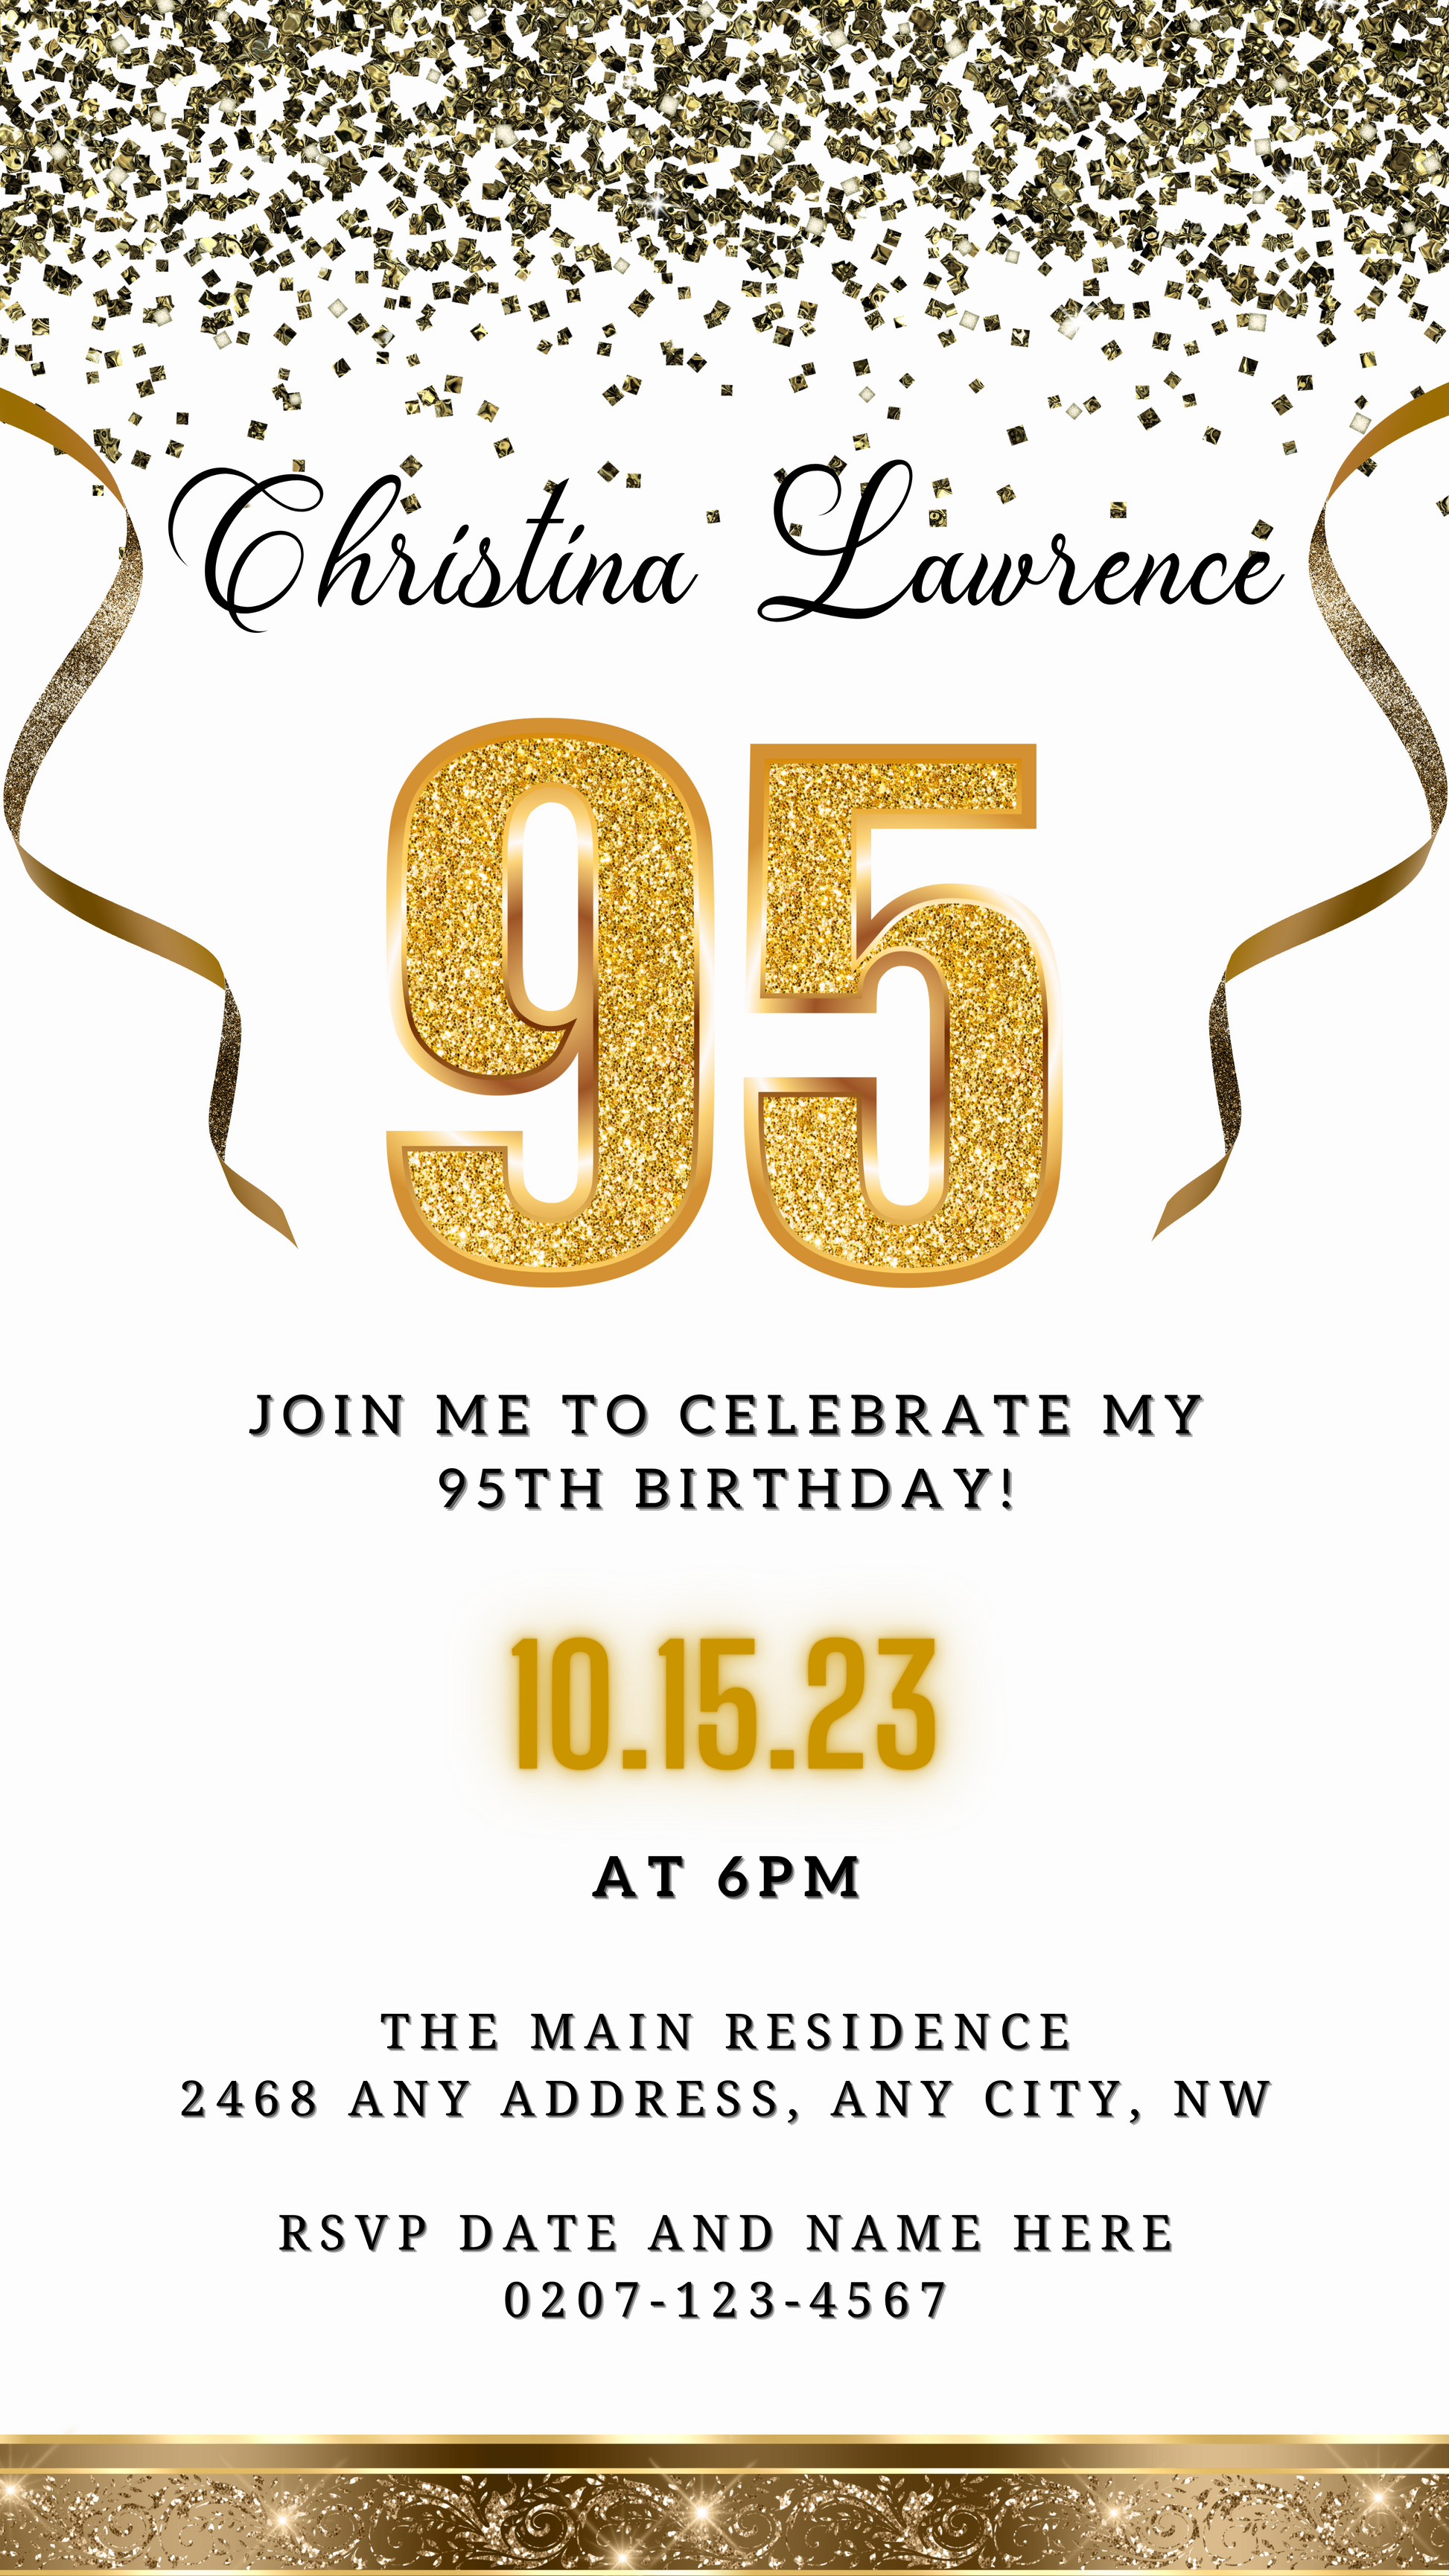 Customizable White Gold Confetti 95th Birthday Evite featuring gold numbers and ribbons on a white background, designed for easy personalization and digital sharing via Canva.